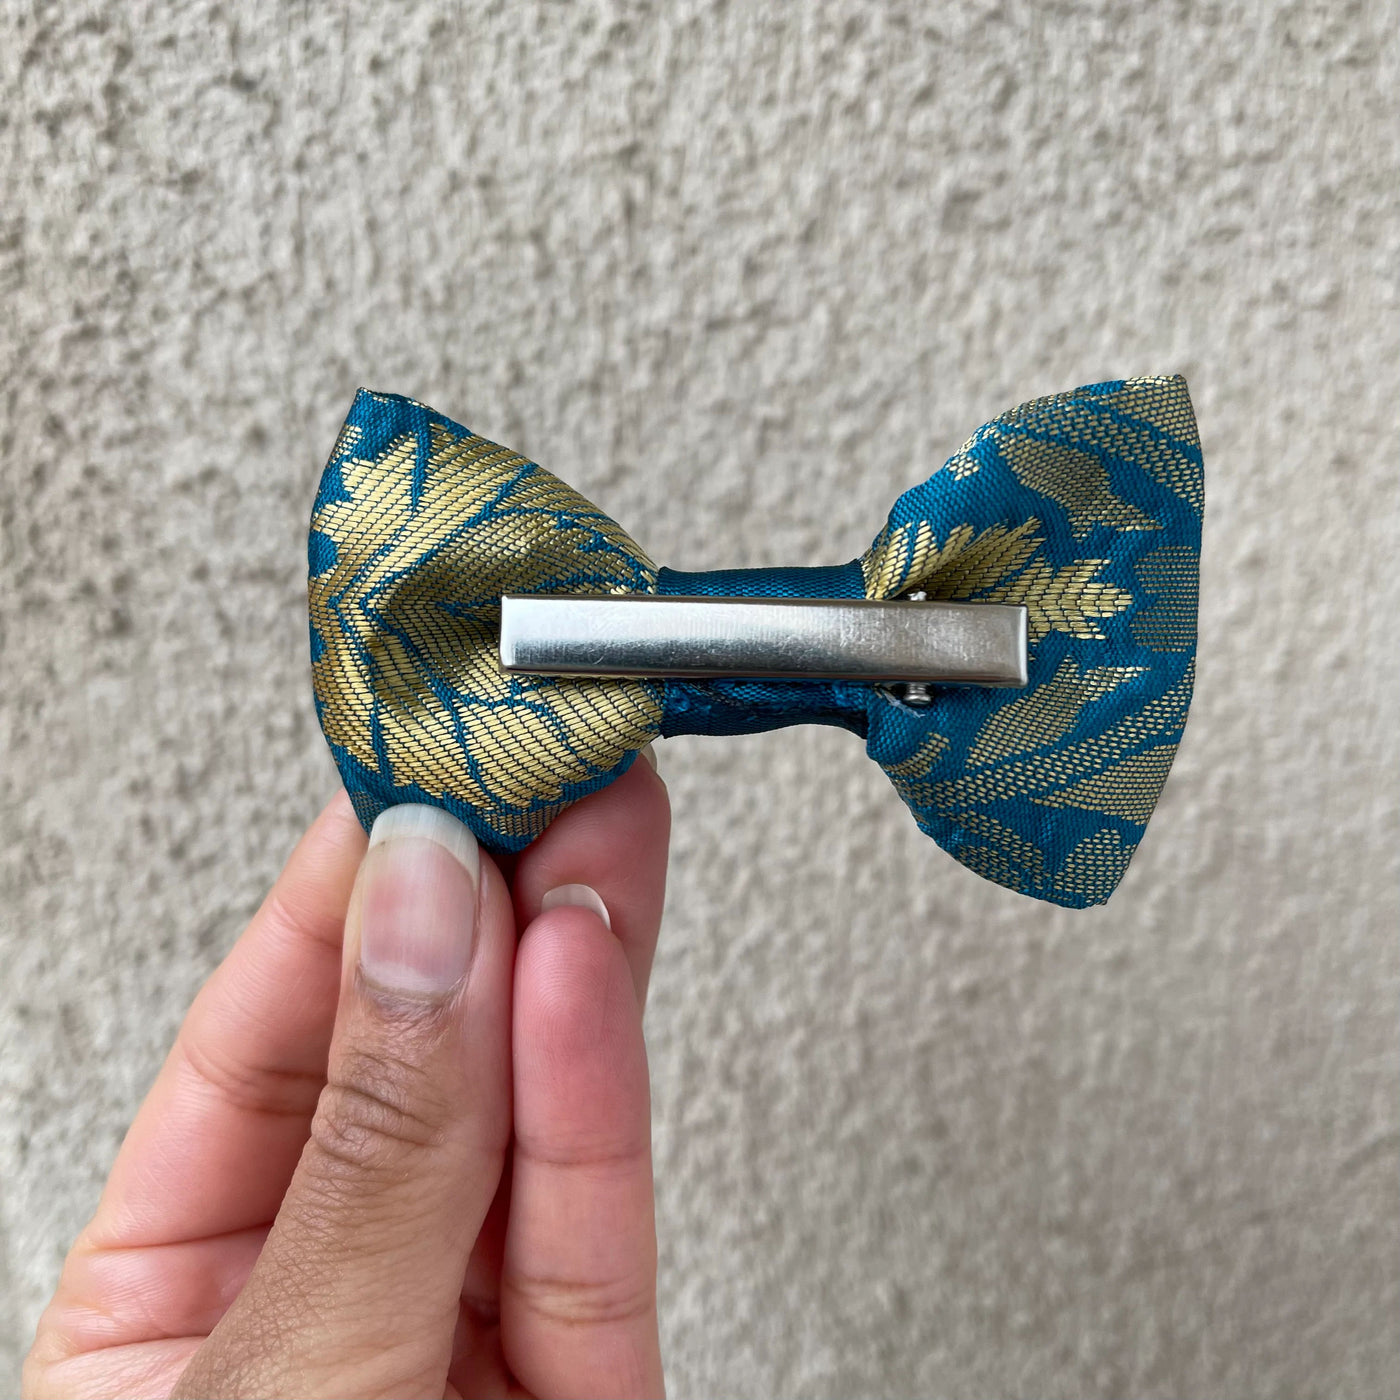 Teal and Gold Sari Bow Tie (Clip on)